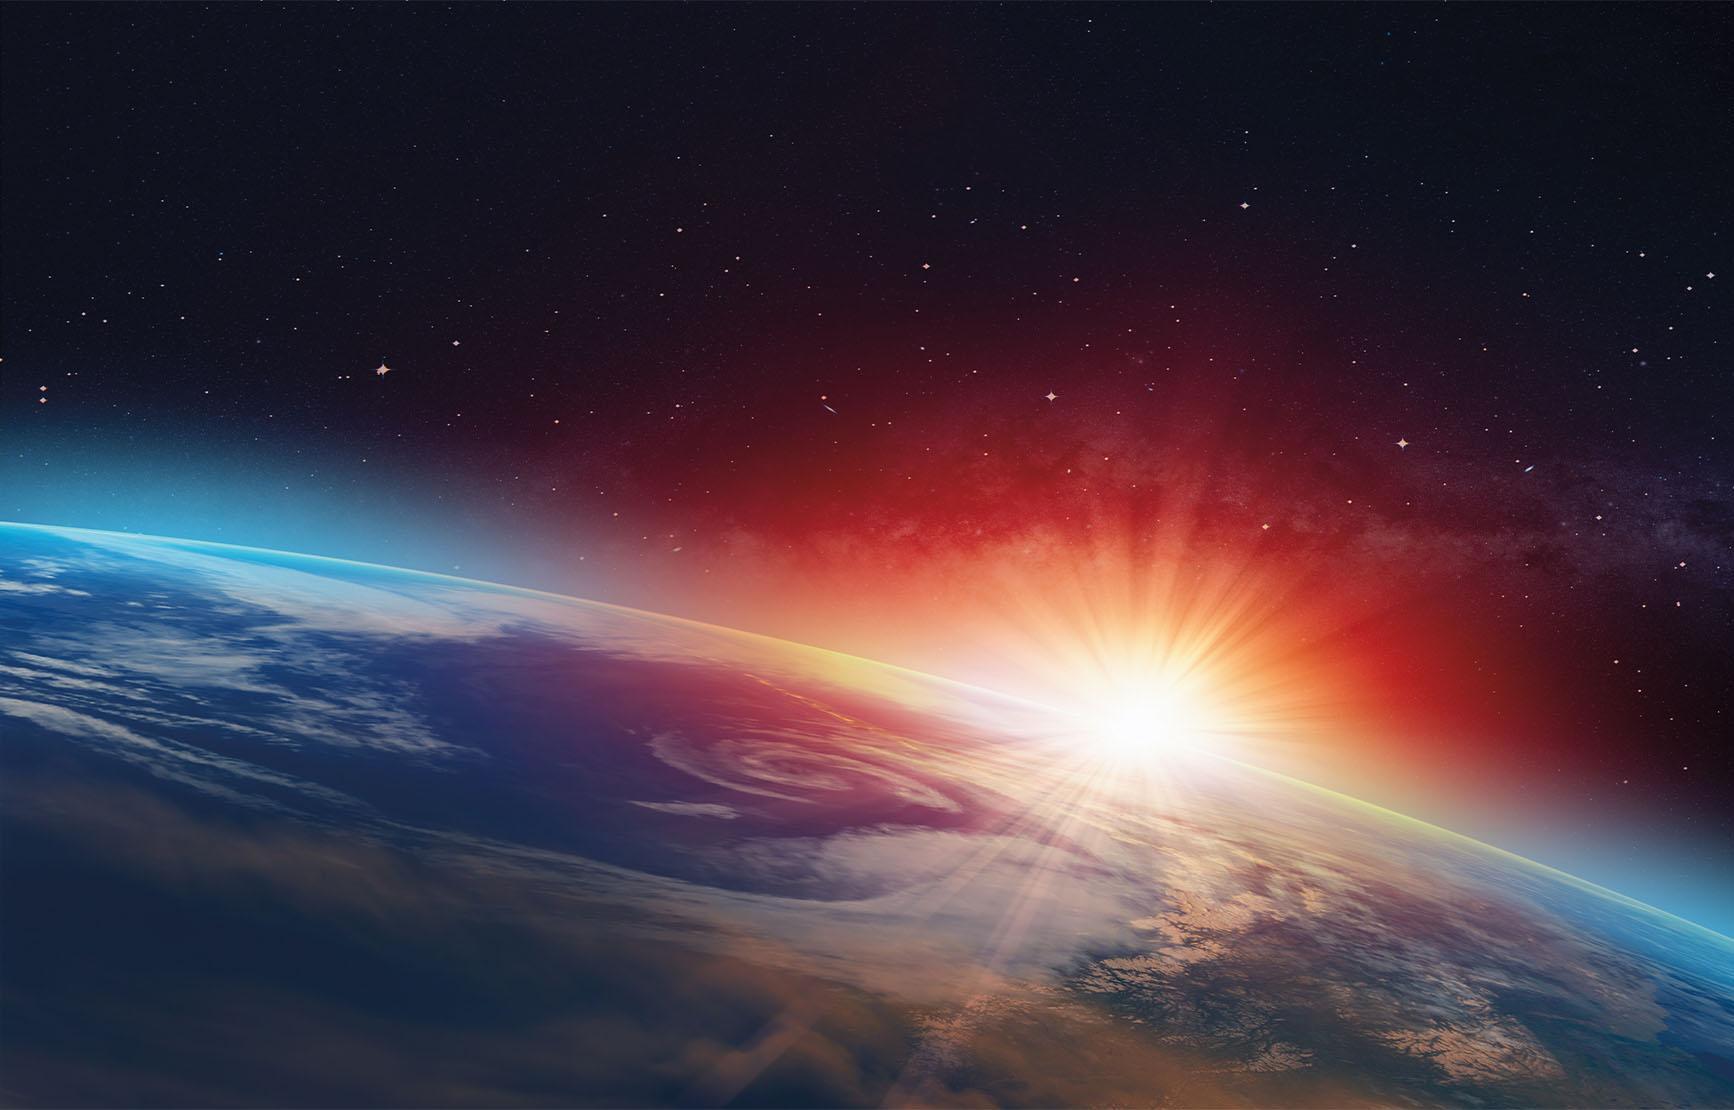 Artist's rendering of the Sun on the Earth's horizon as seen from space